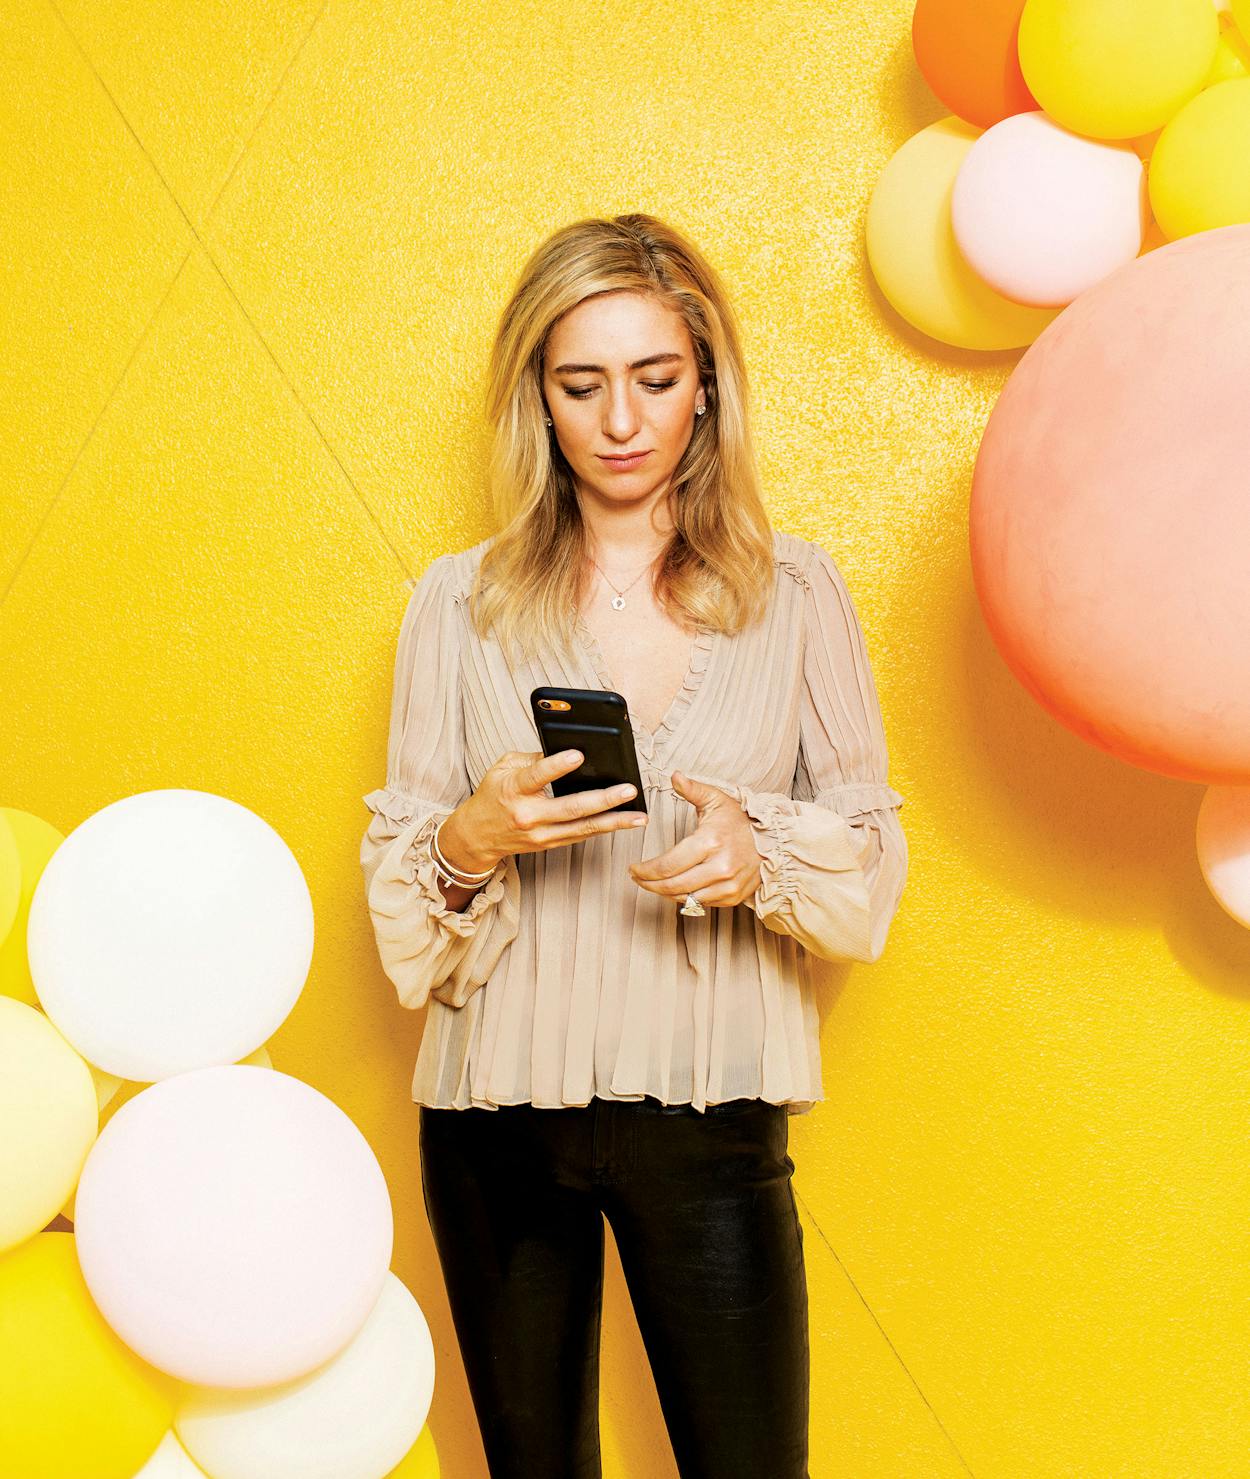 Www Australian Hot Sex Hq Video Com - How Whitney Wolfe Herd Changed the Dating Game â€“ Texas Monthly